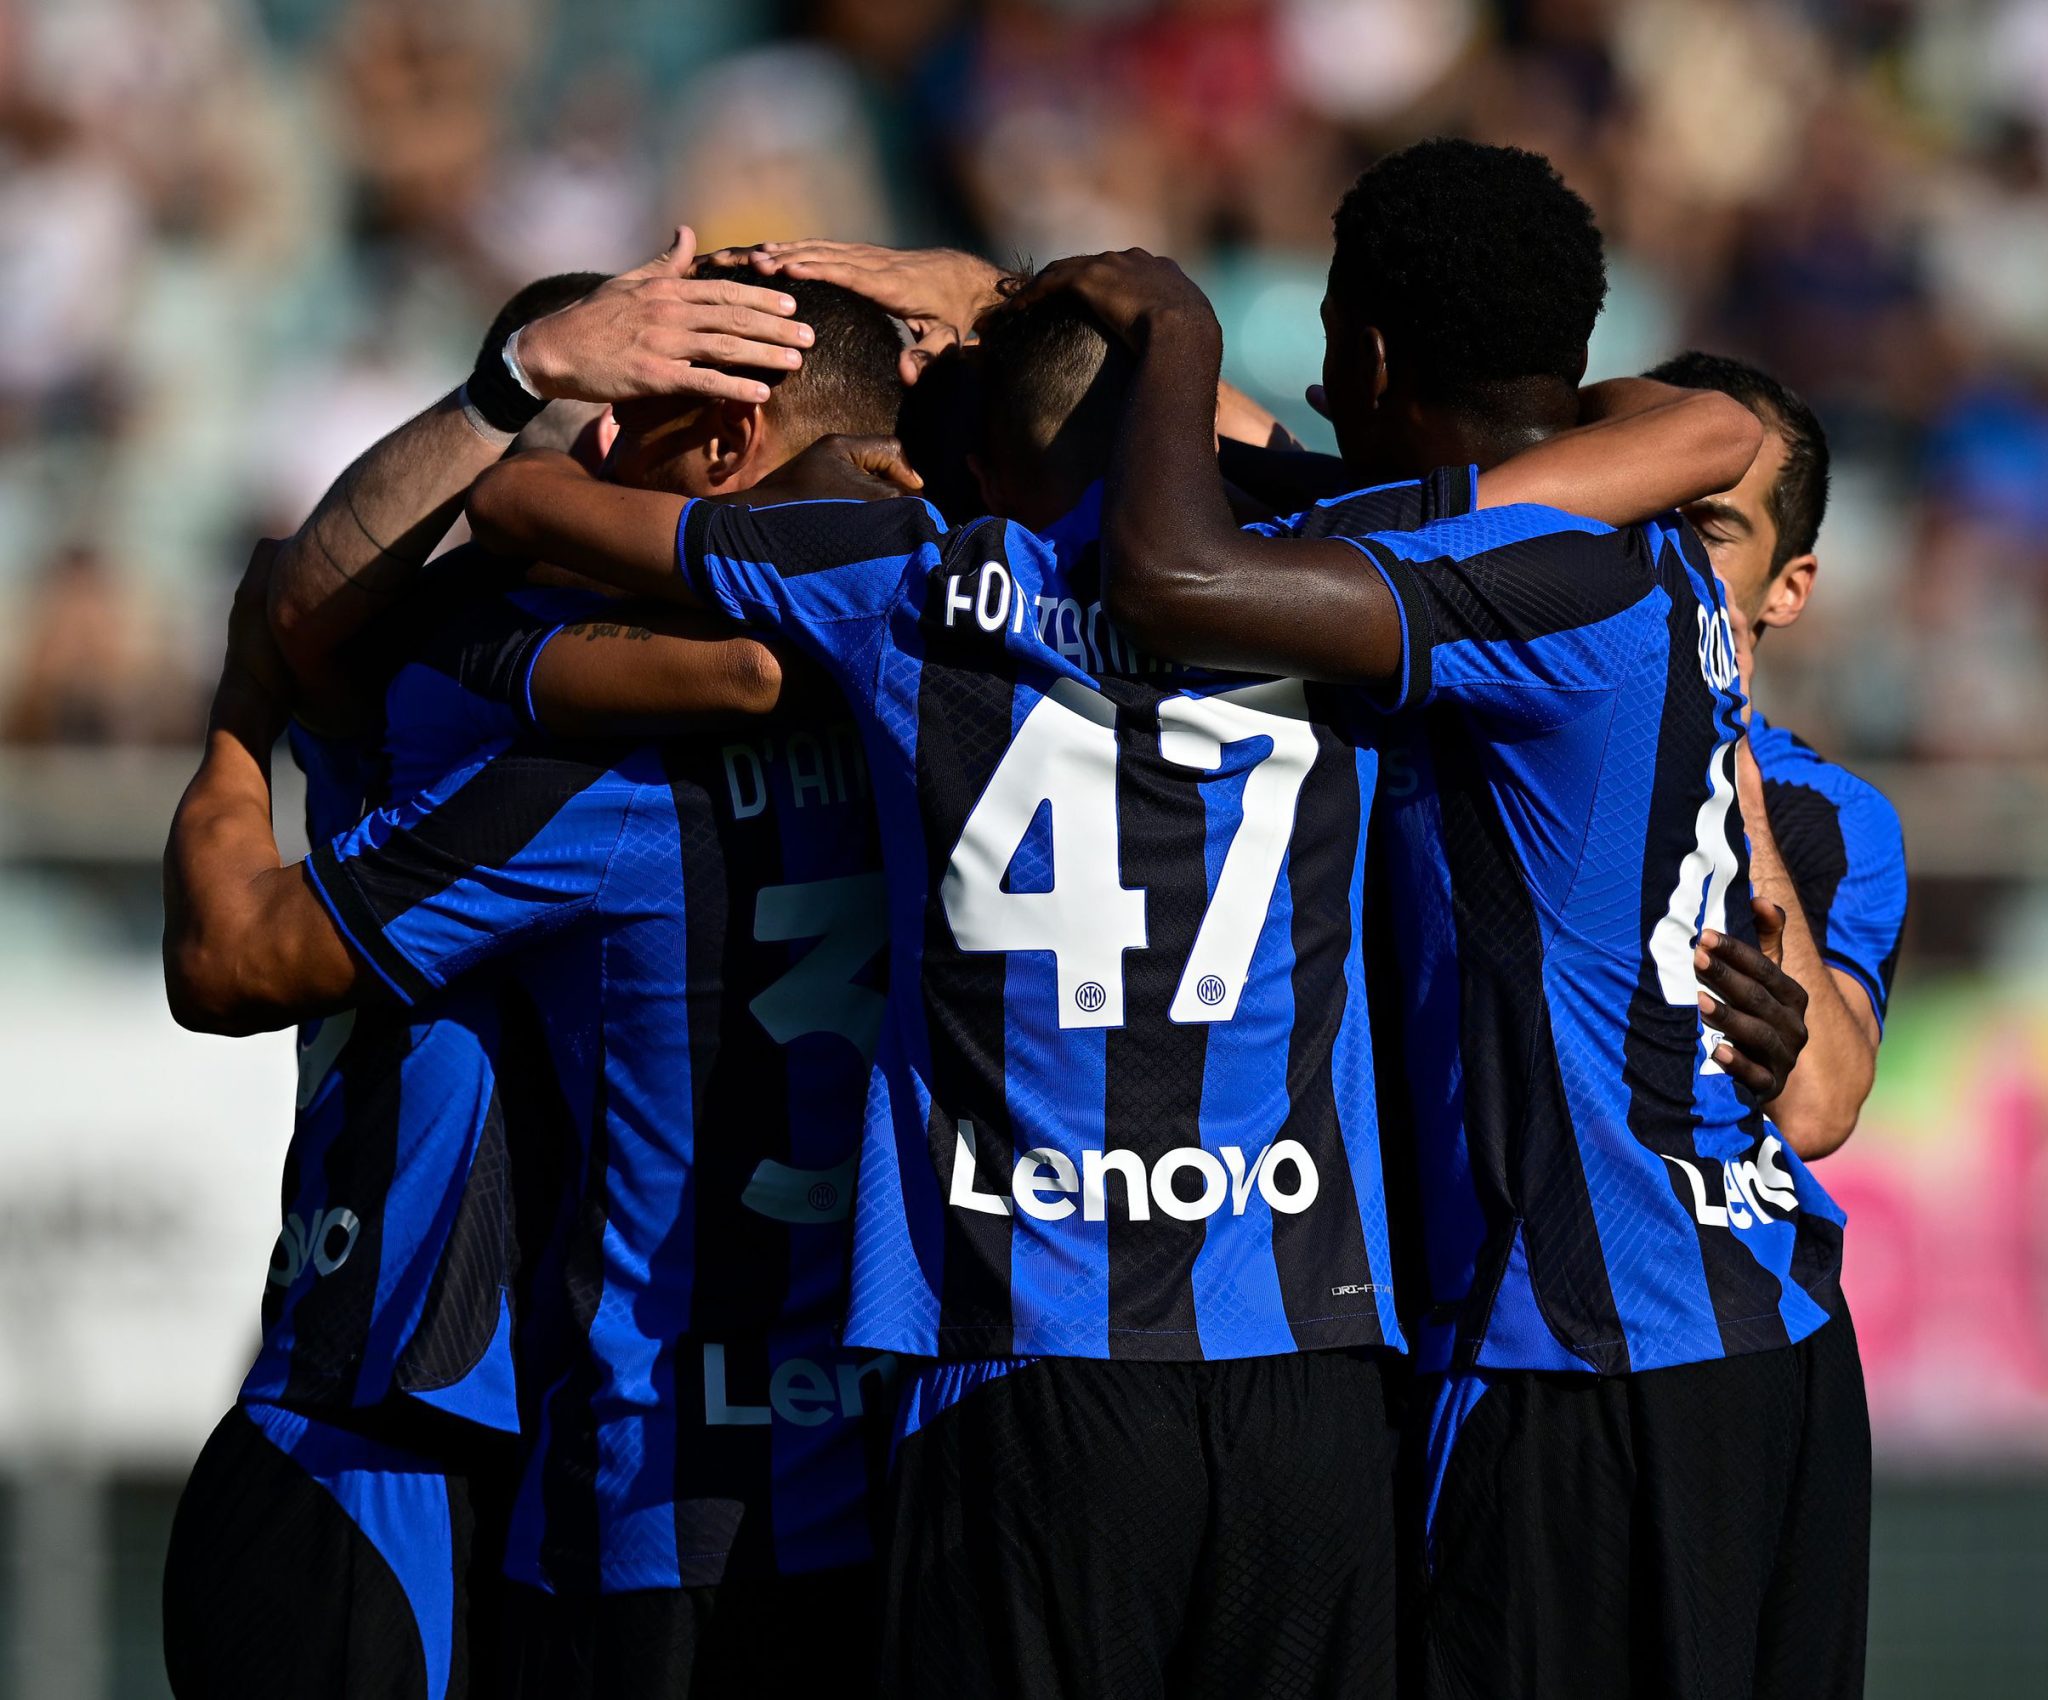 Danilo D'Ambrosio of FC Internazionale celebrates with teammates after scoring his team's first goal during the pre-season Friendly match between Lugano v FC Internazionale at Stadio Cornaredo in Lugano on July 12, 2022 in Lugano, Switzerland. (Photo by Mattia Ozbot - Inter/Inter via Getty Images)